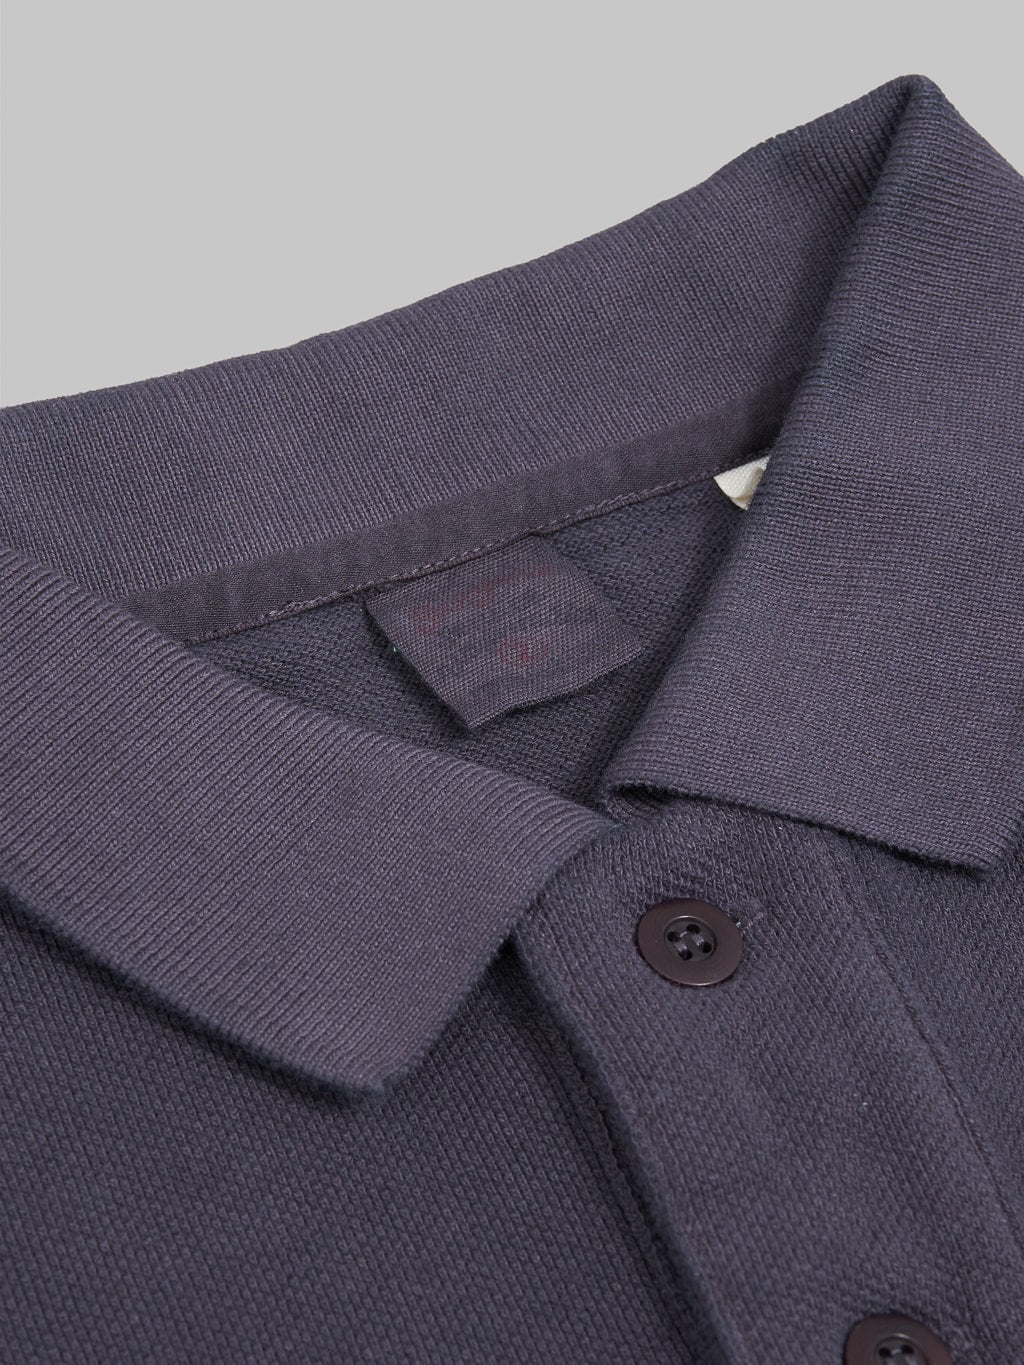 ues polo shirt navy weft collar texture